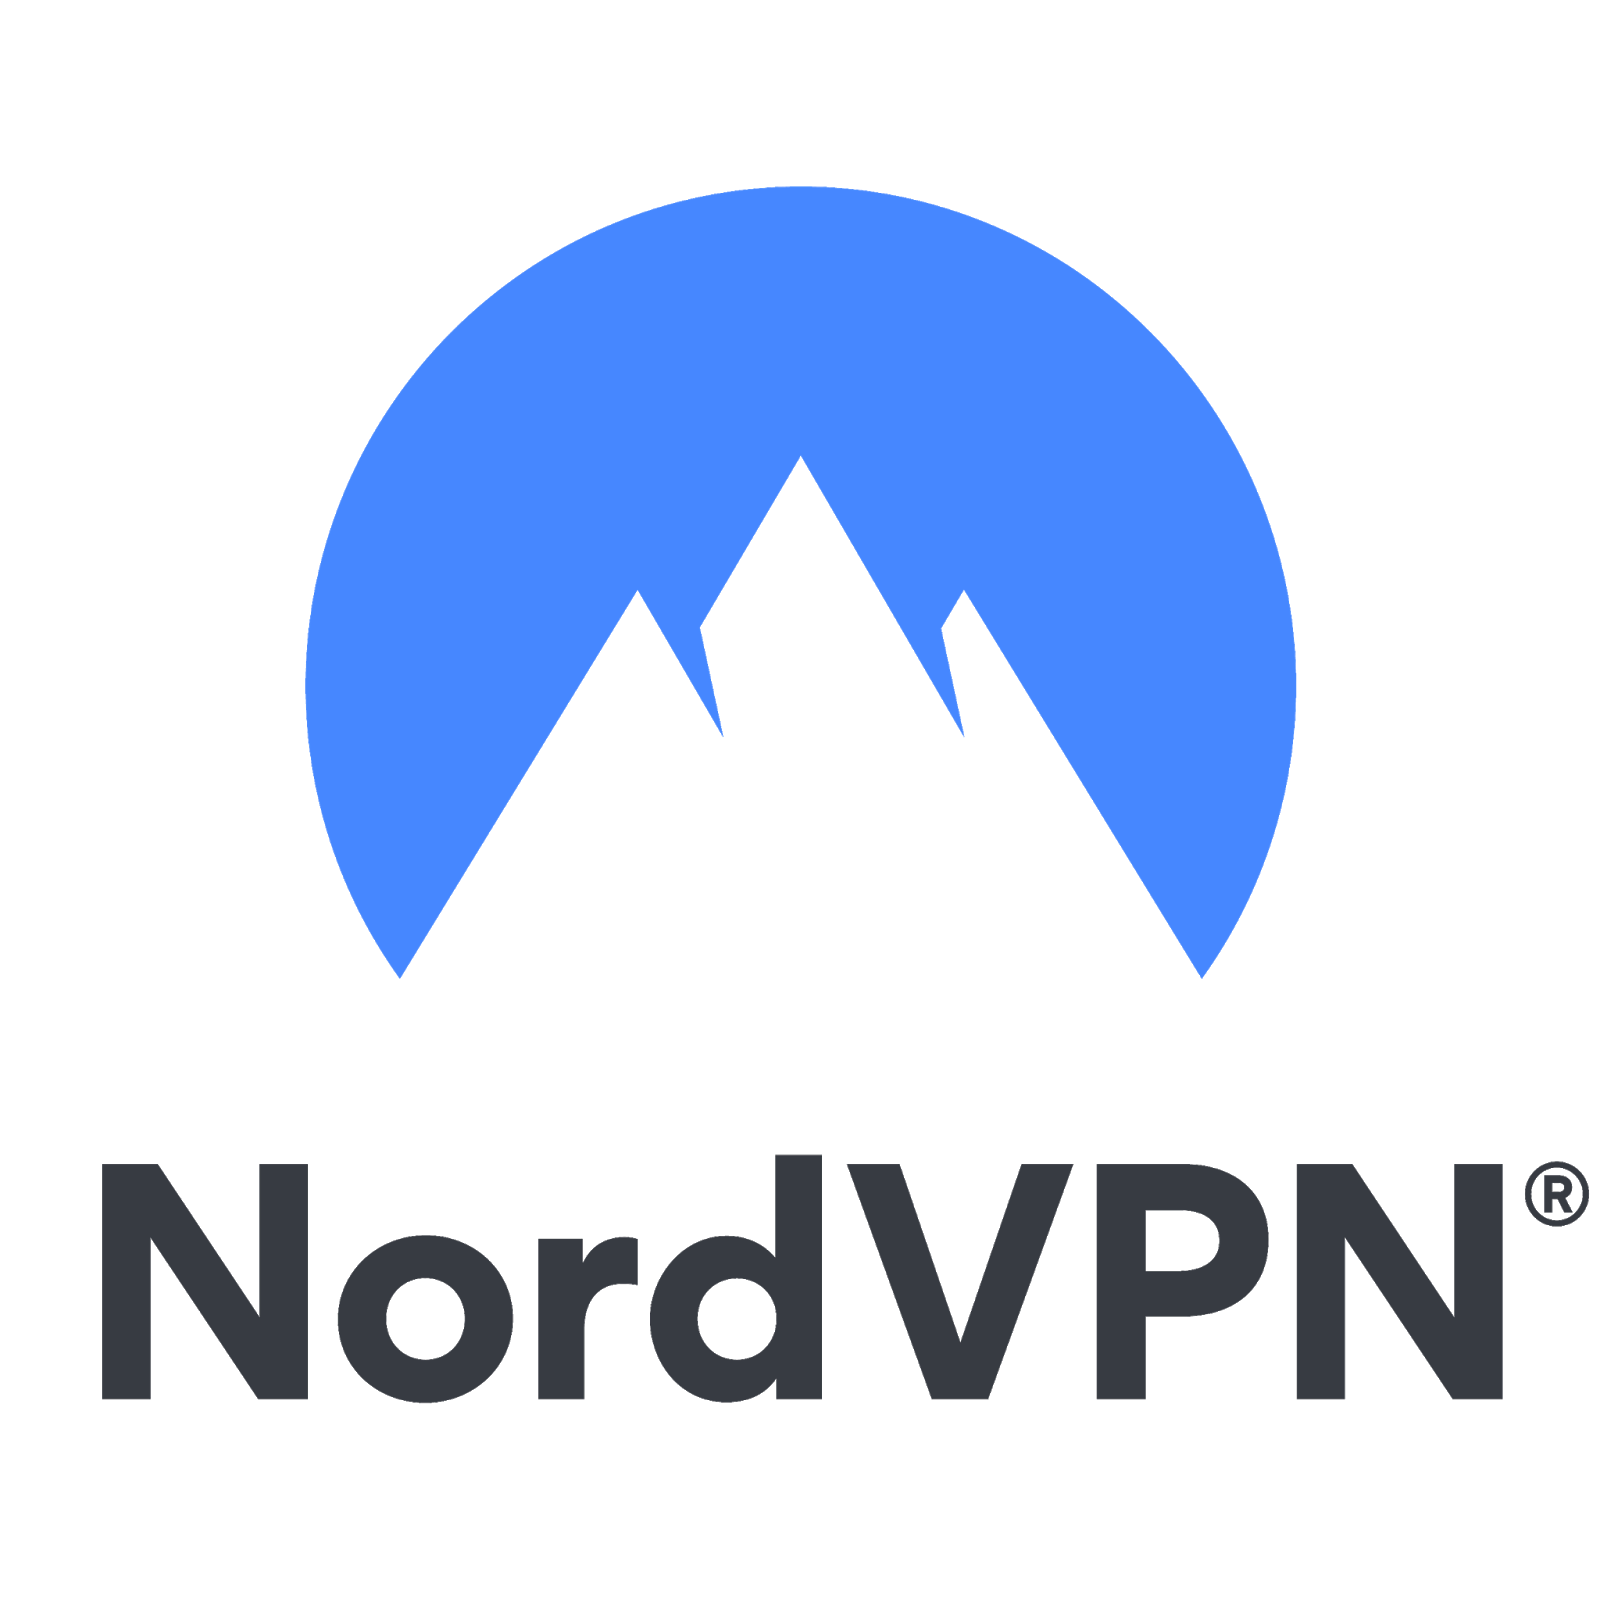 NordVPN 6.35.9.0 Crack With License Key Latest 2021 Download